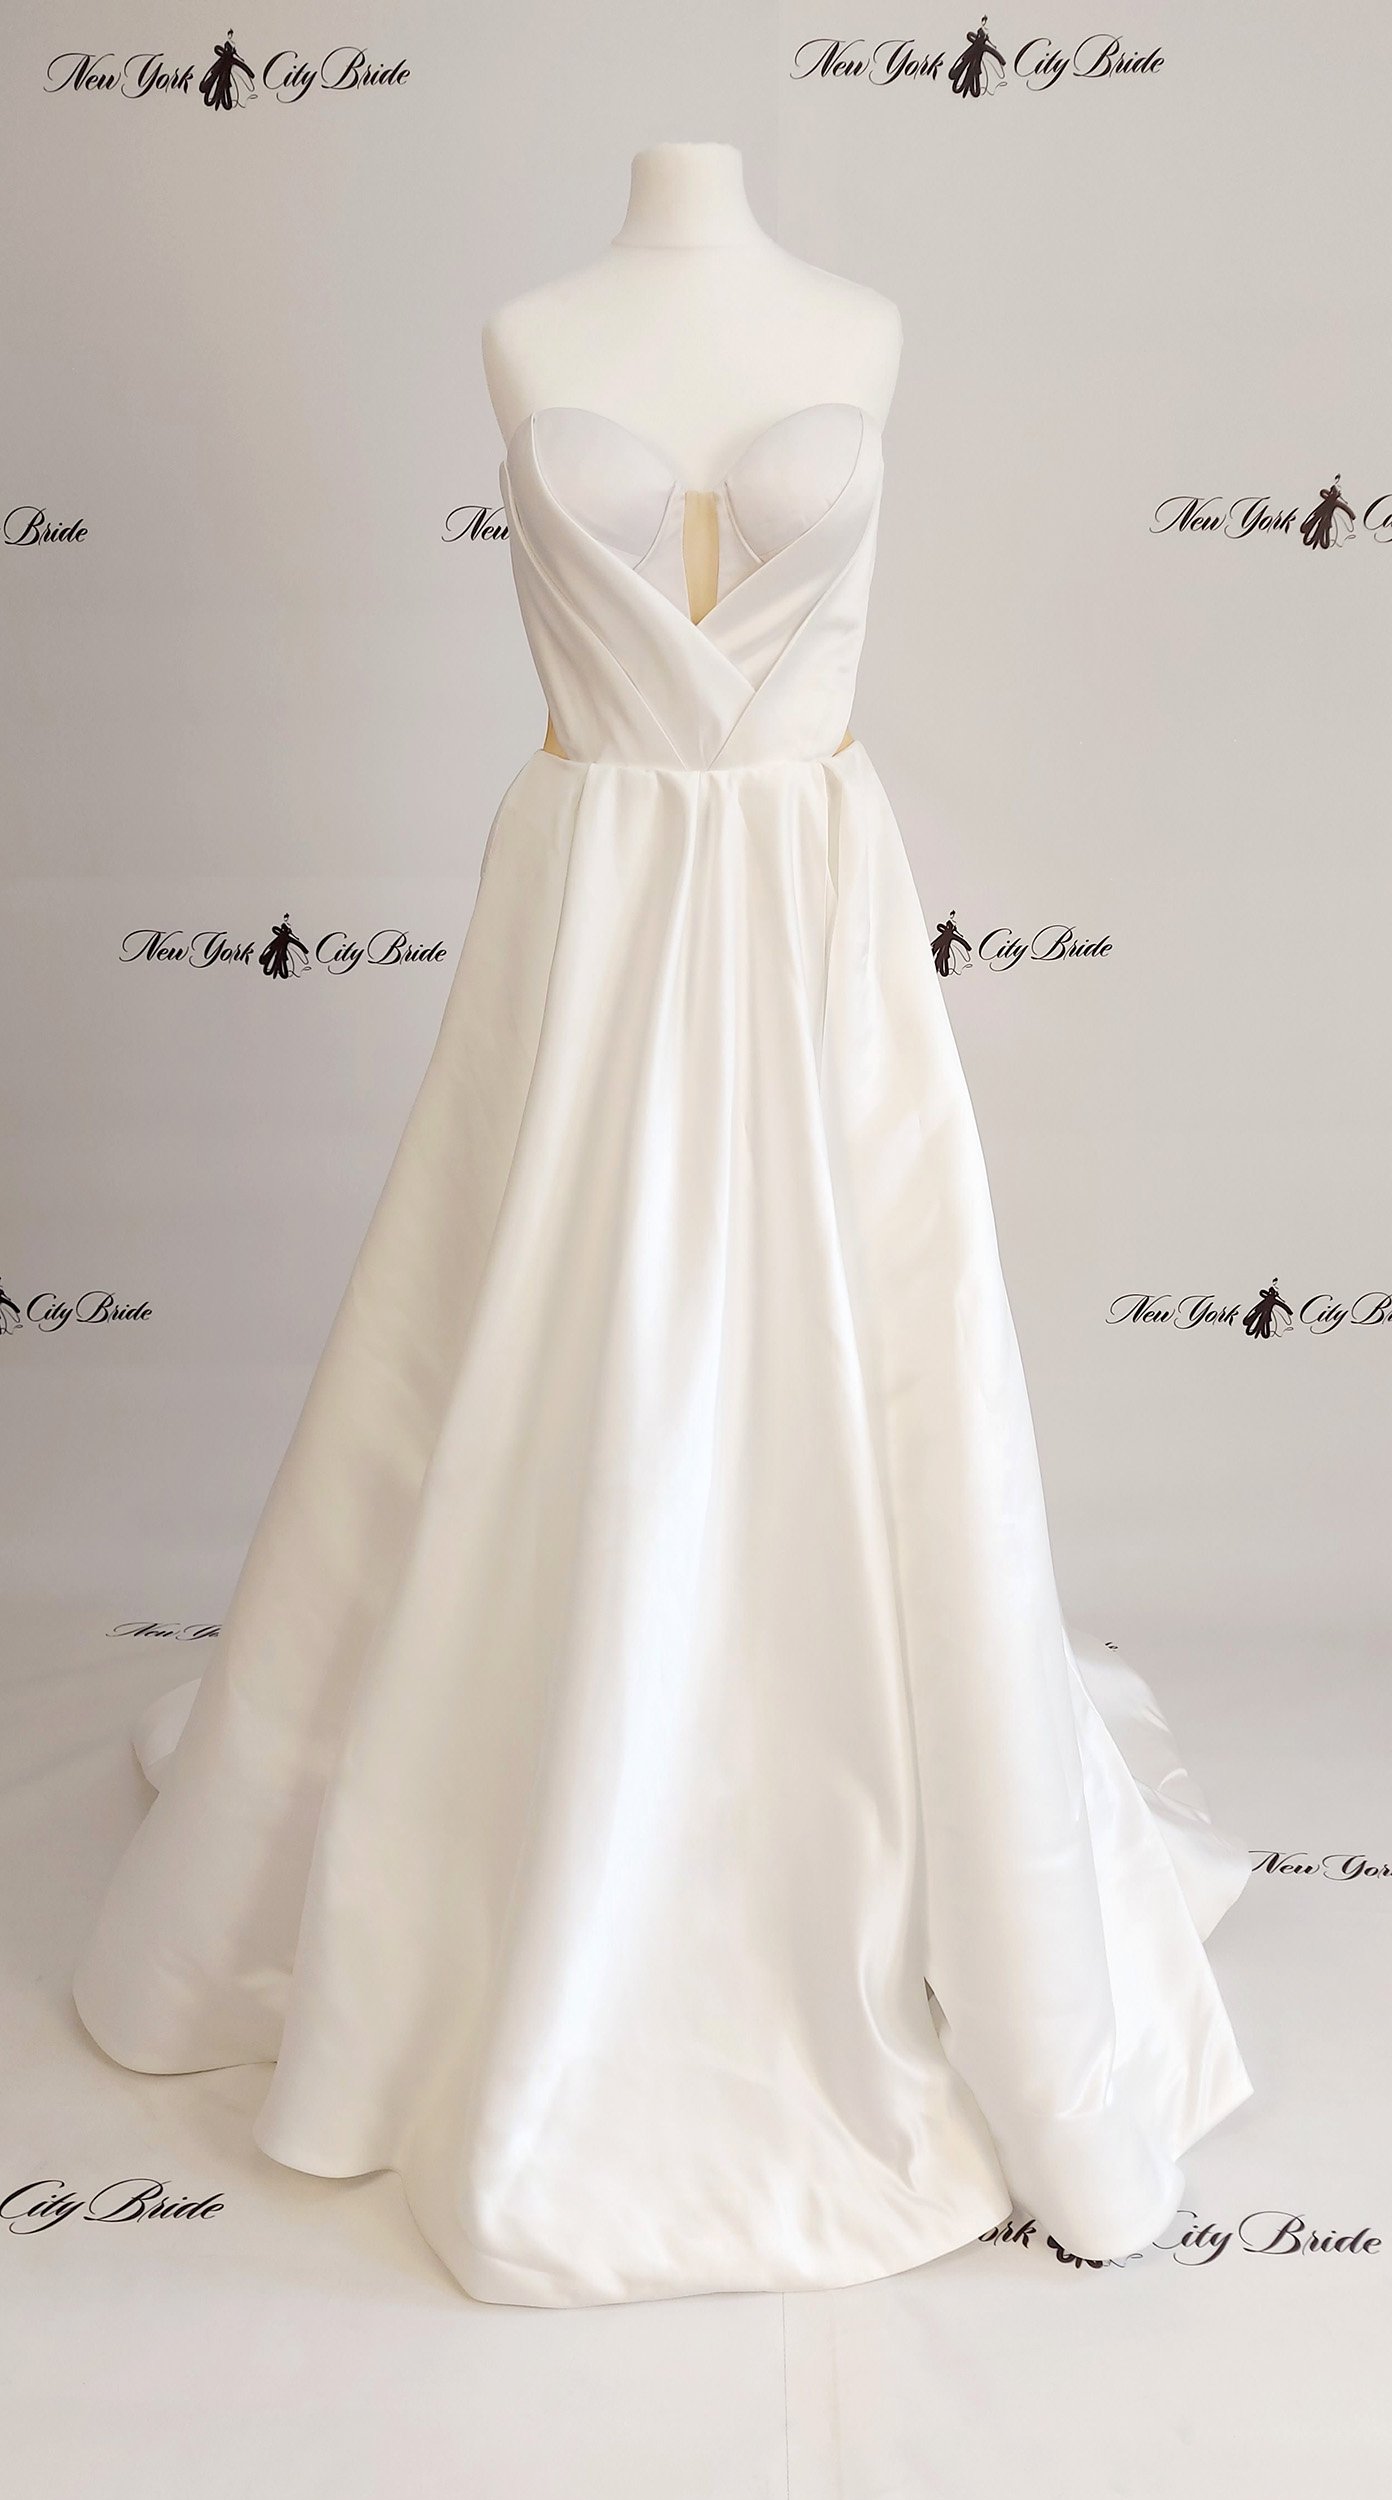 Wedding dress Annetta Product for Sale at NY City Bride